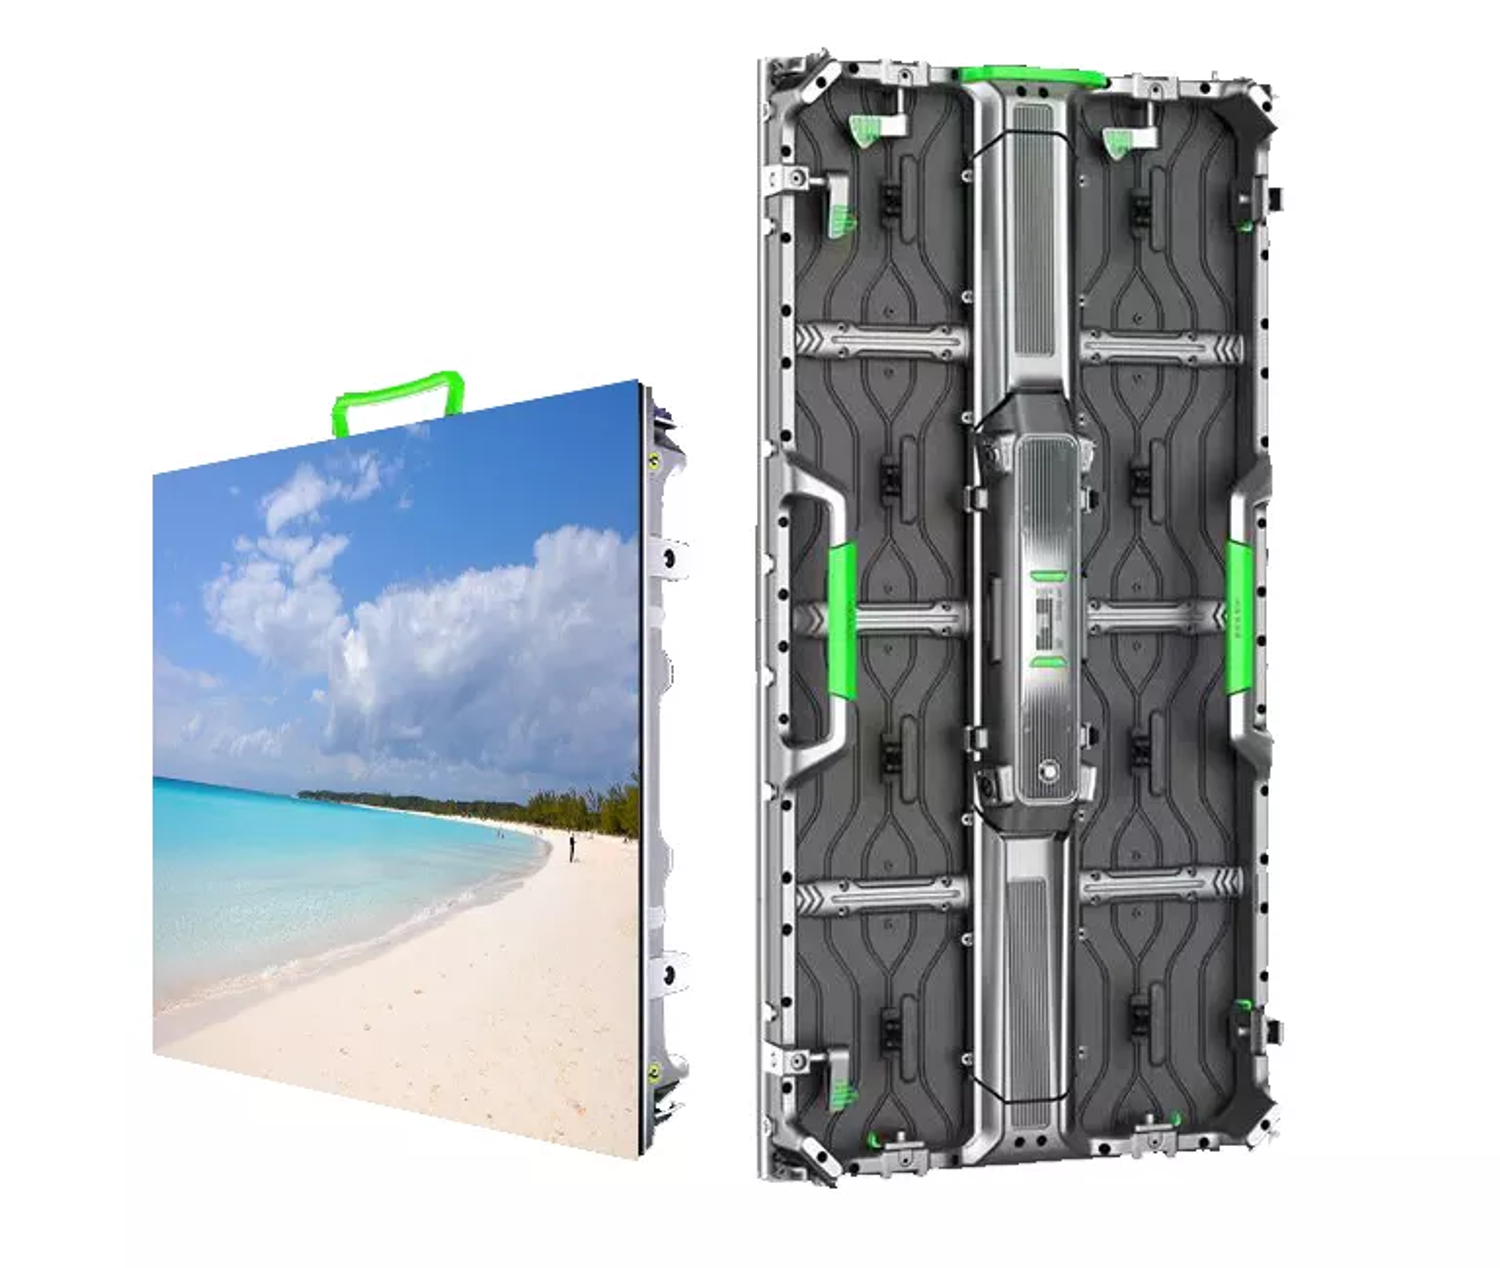 Eachinled SN series portable LED display screen with a tropical beach image